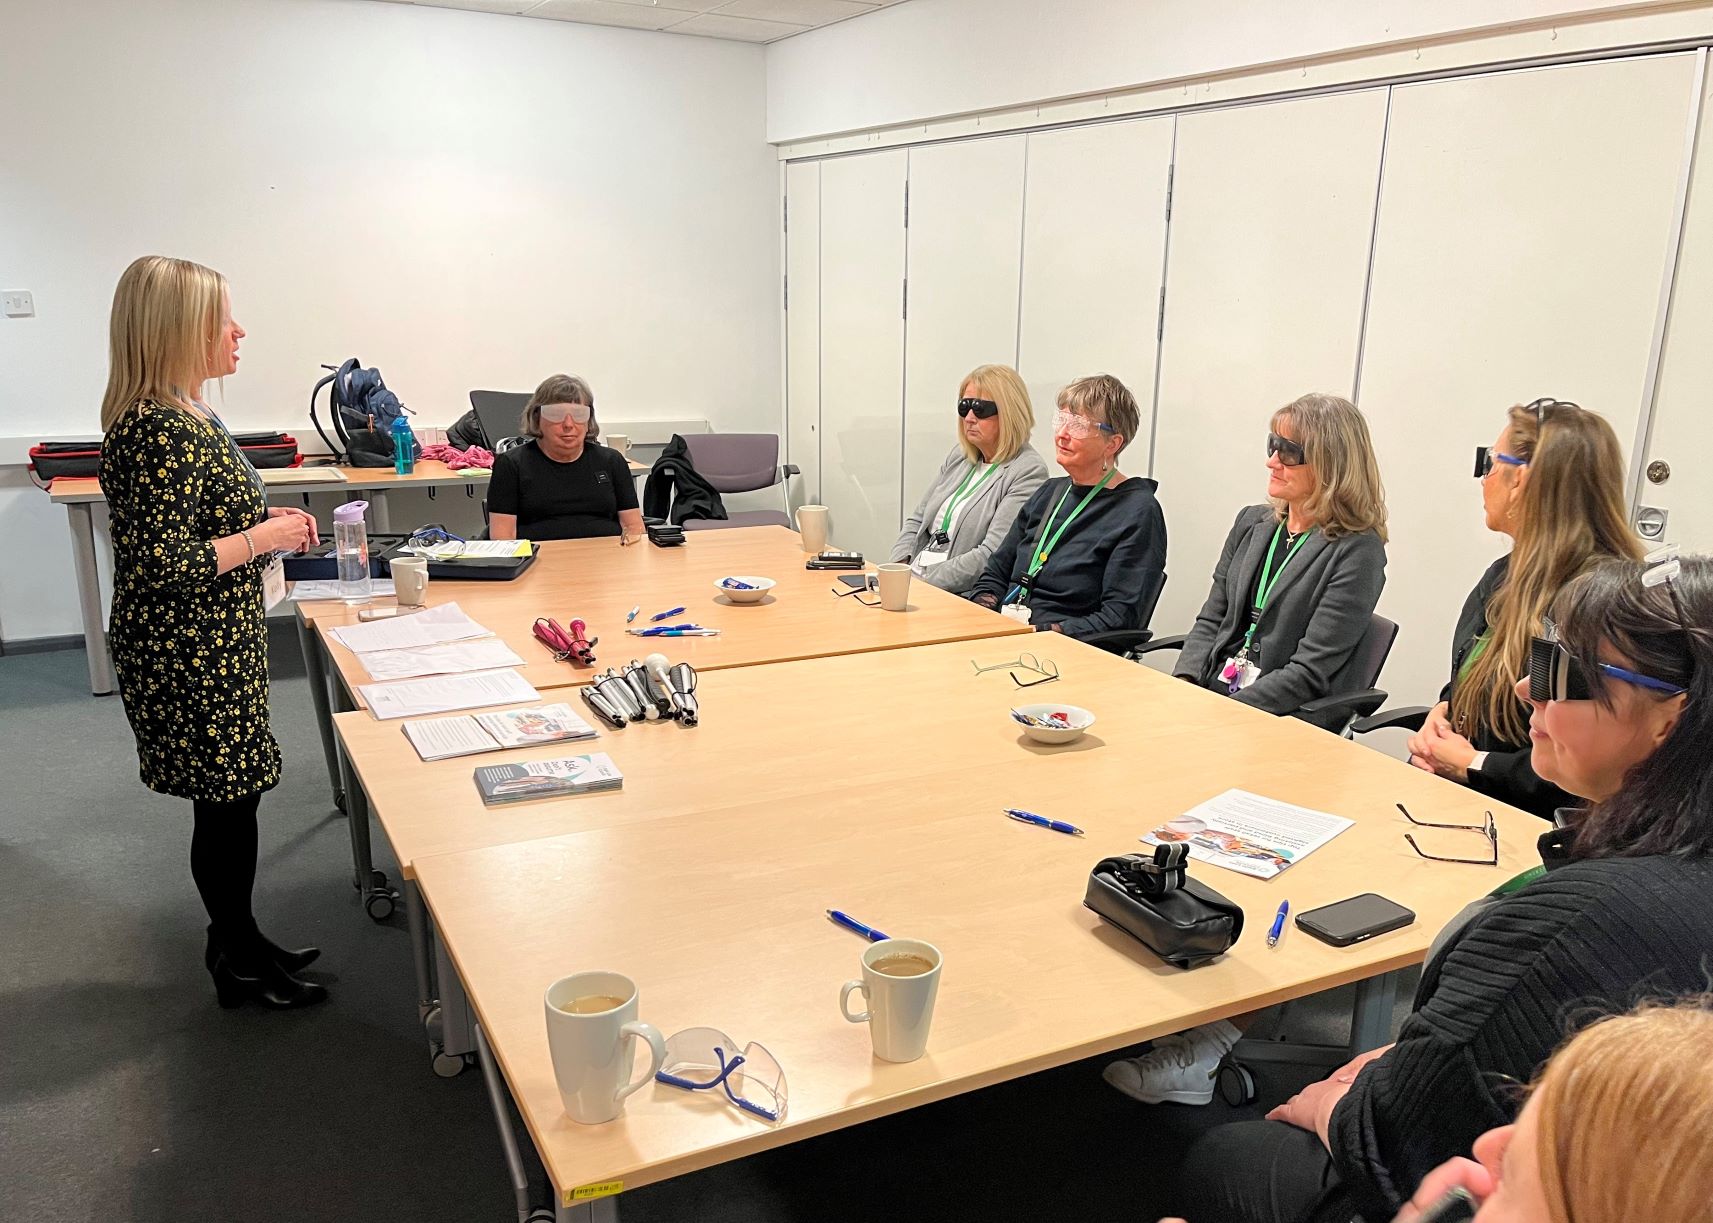 Image shows Kelly Barton, EM for Greater Manchester, presenting to staff members from John Lewis. The team are all sat around a table, wearing sim specs.